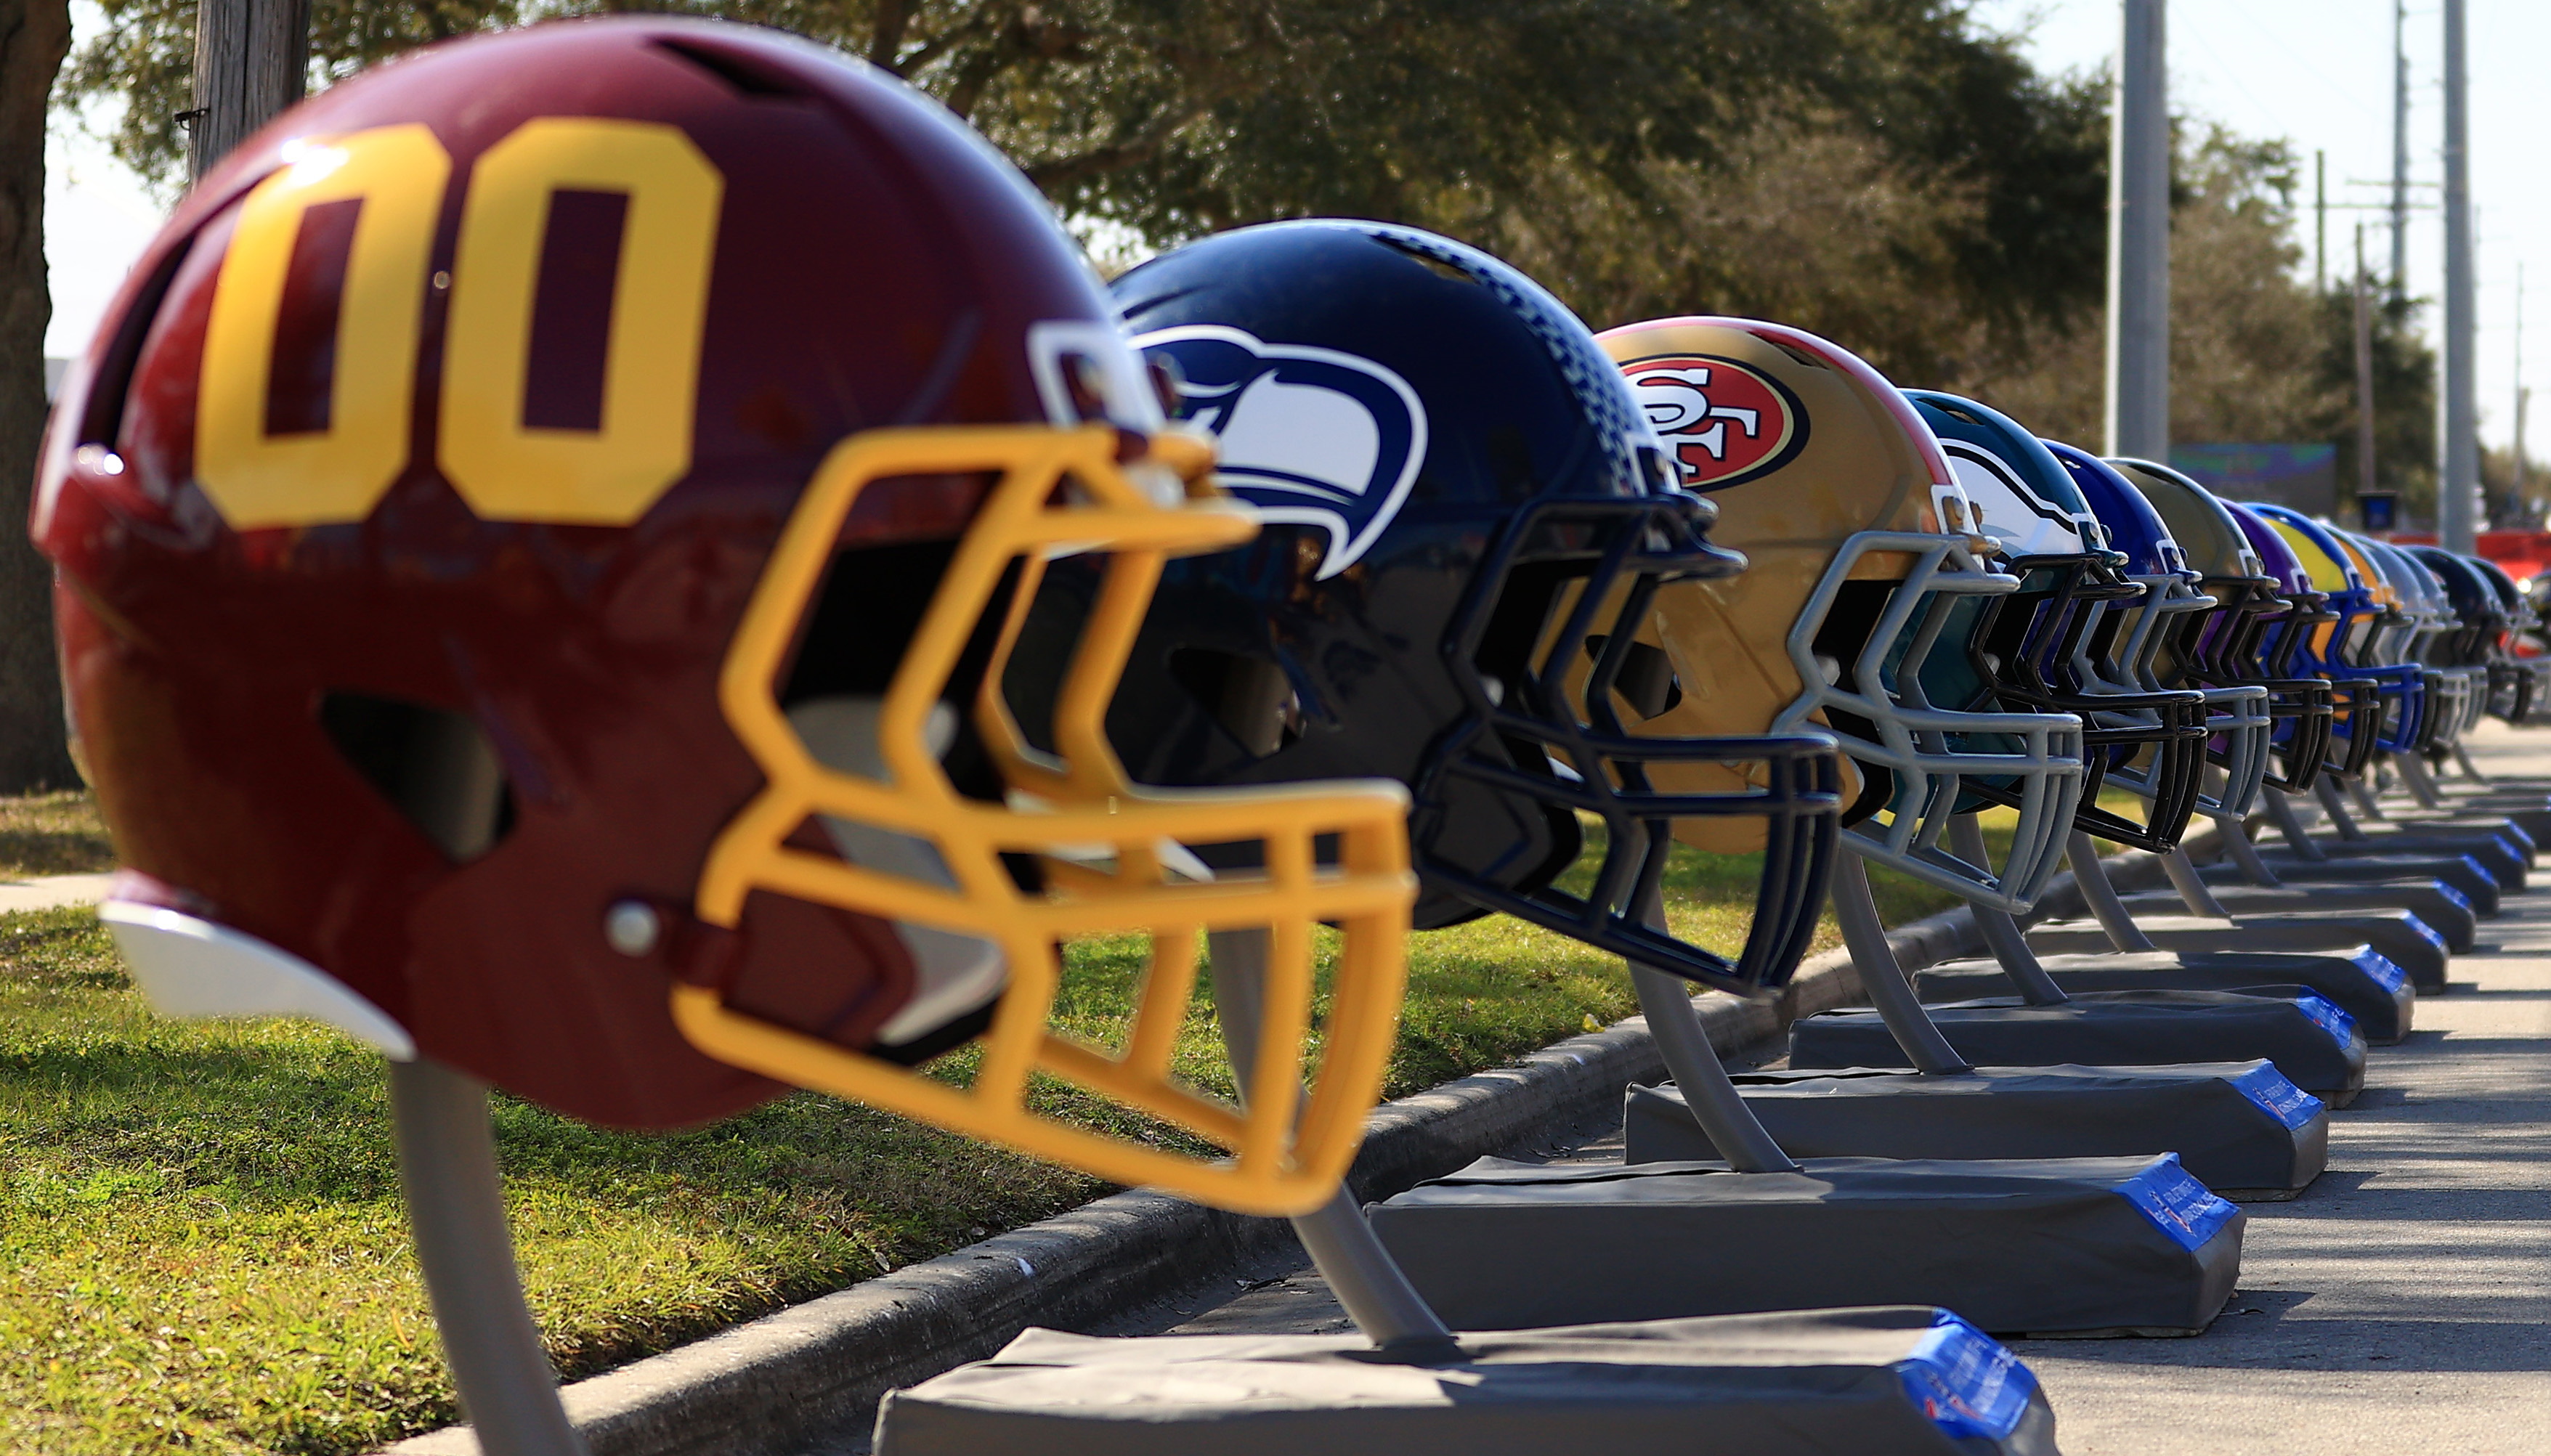 NFL helmets in a row